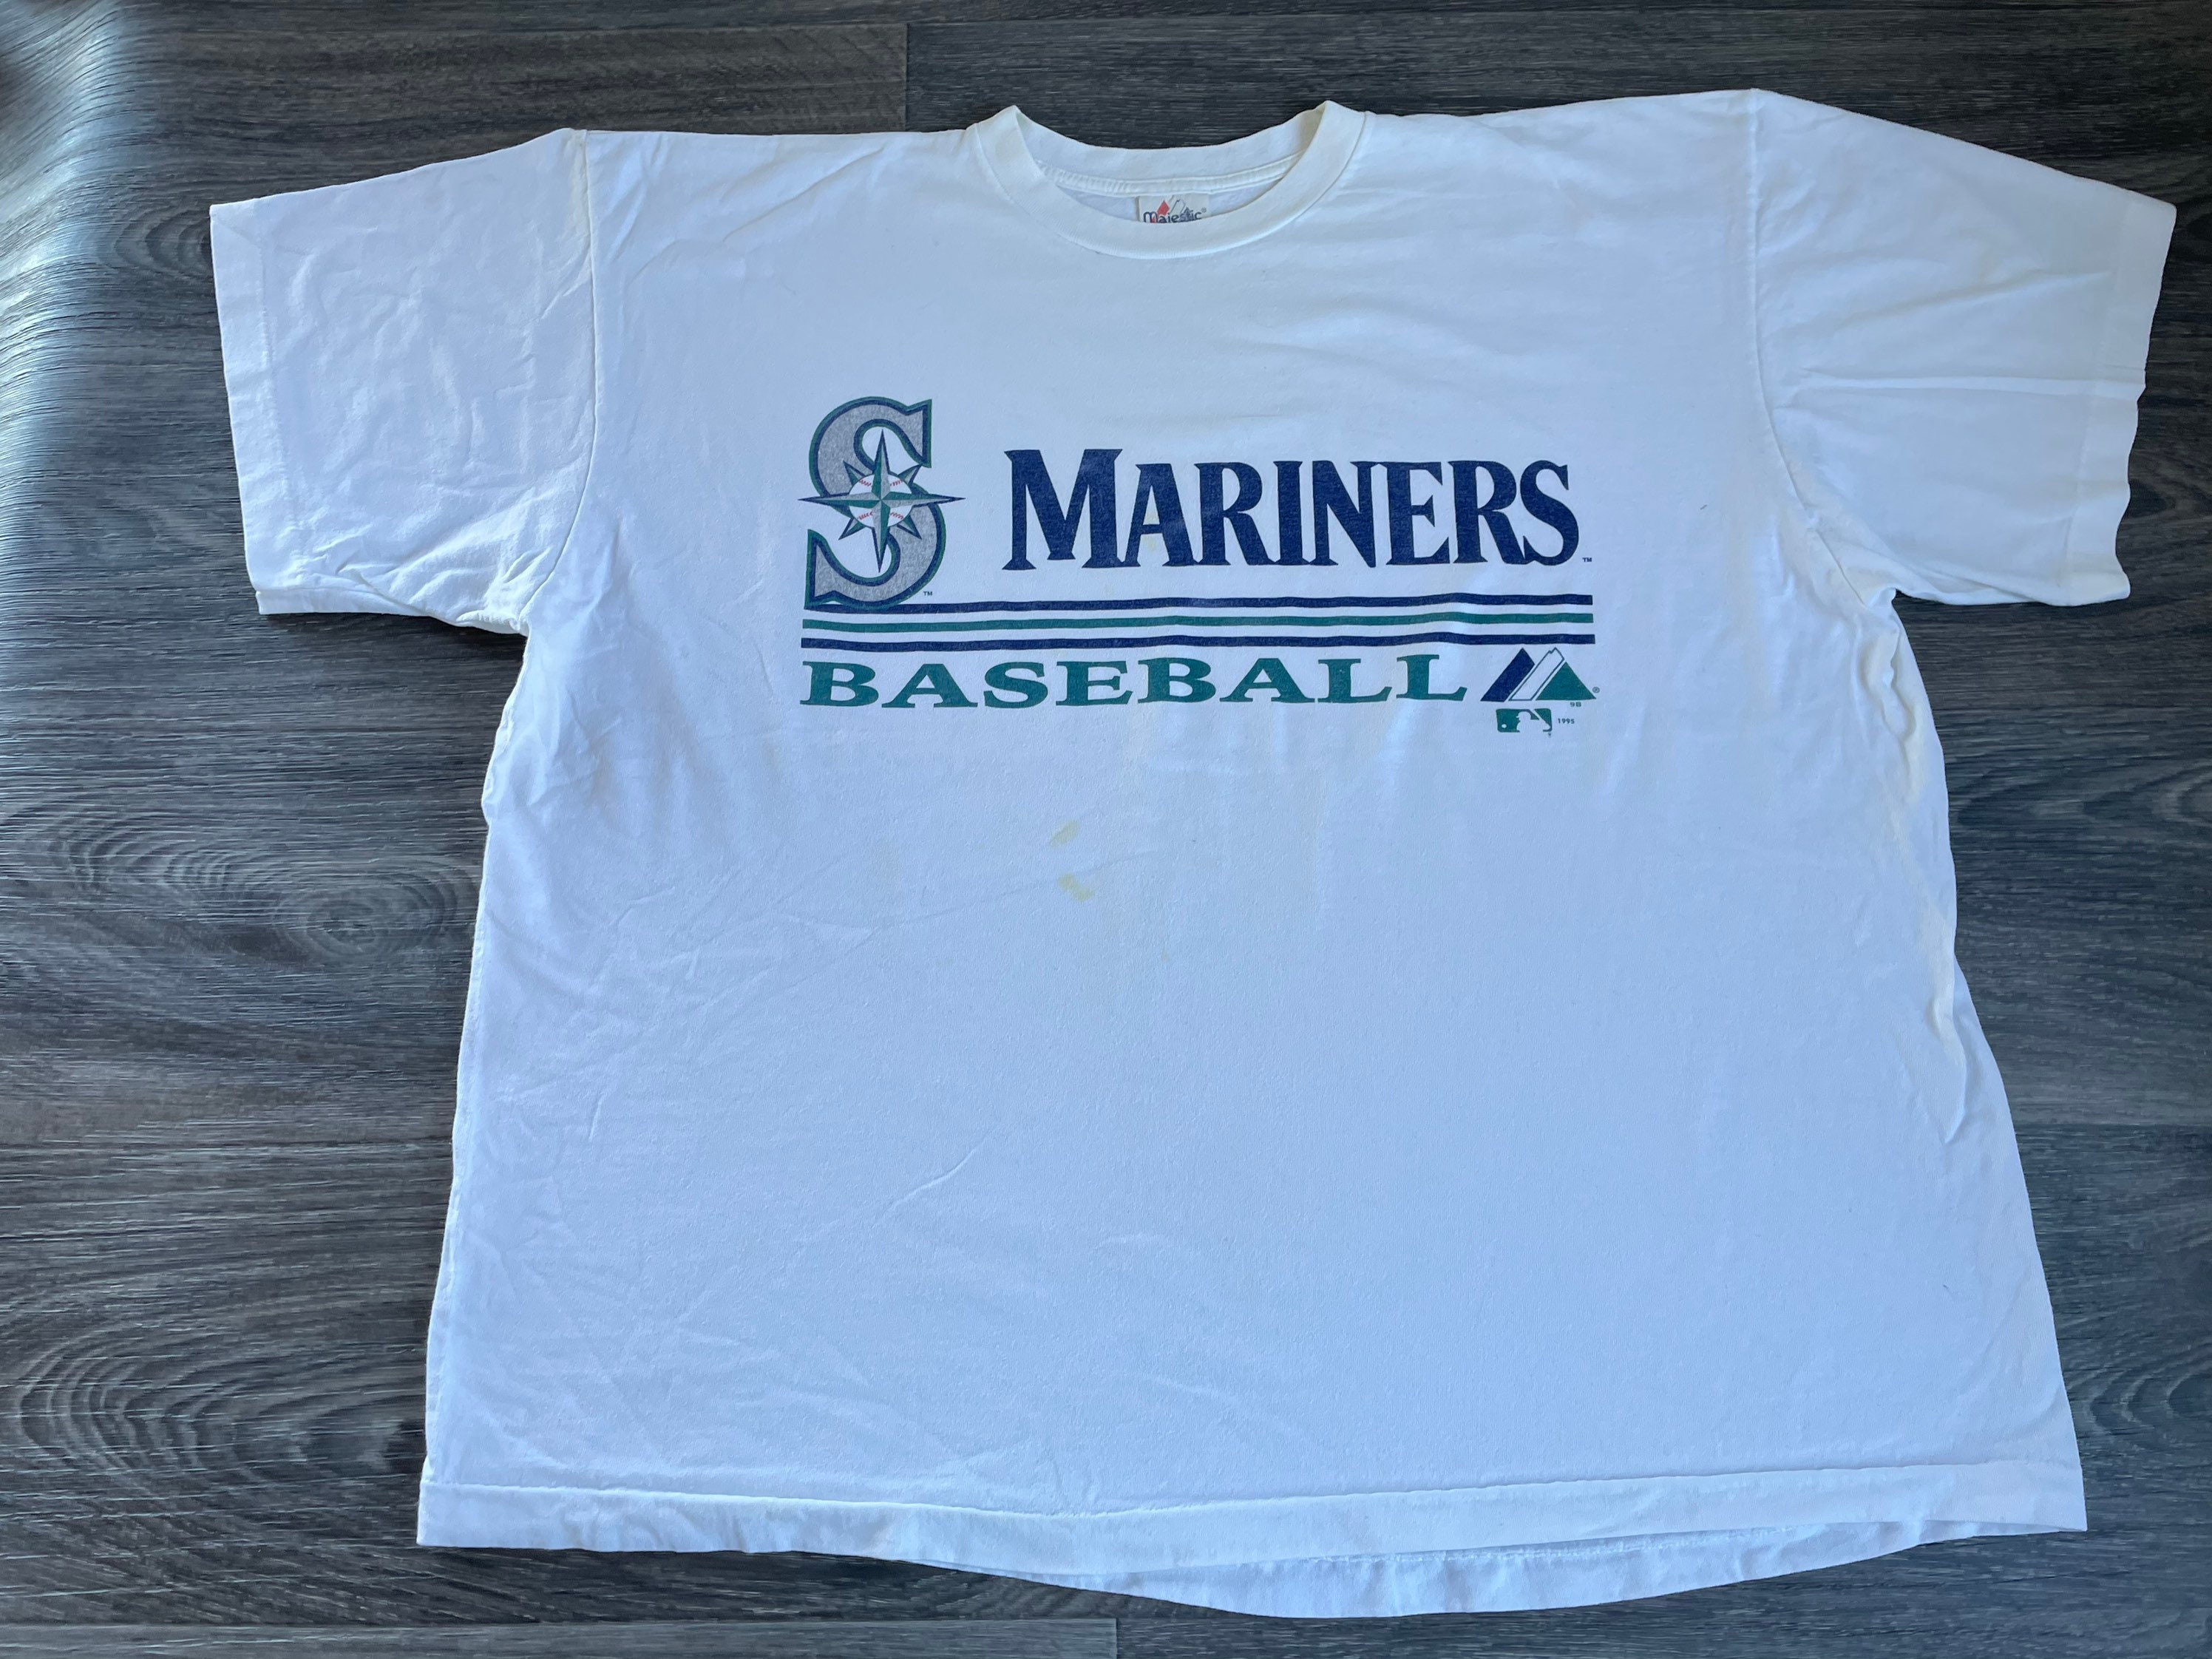 Seattle Mariners jersey like shirt New for Sale in Spanaway, WA